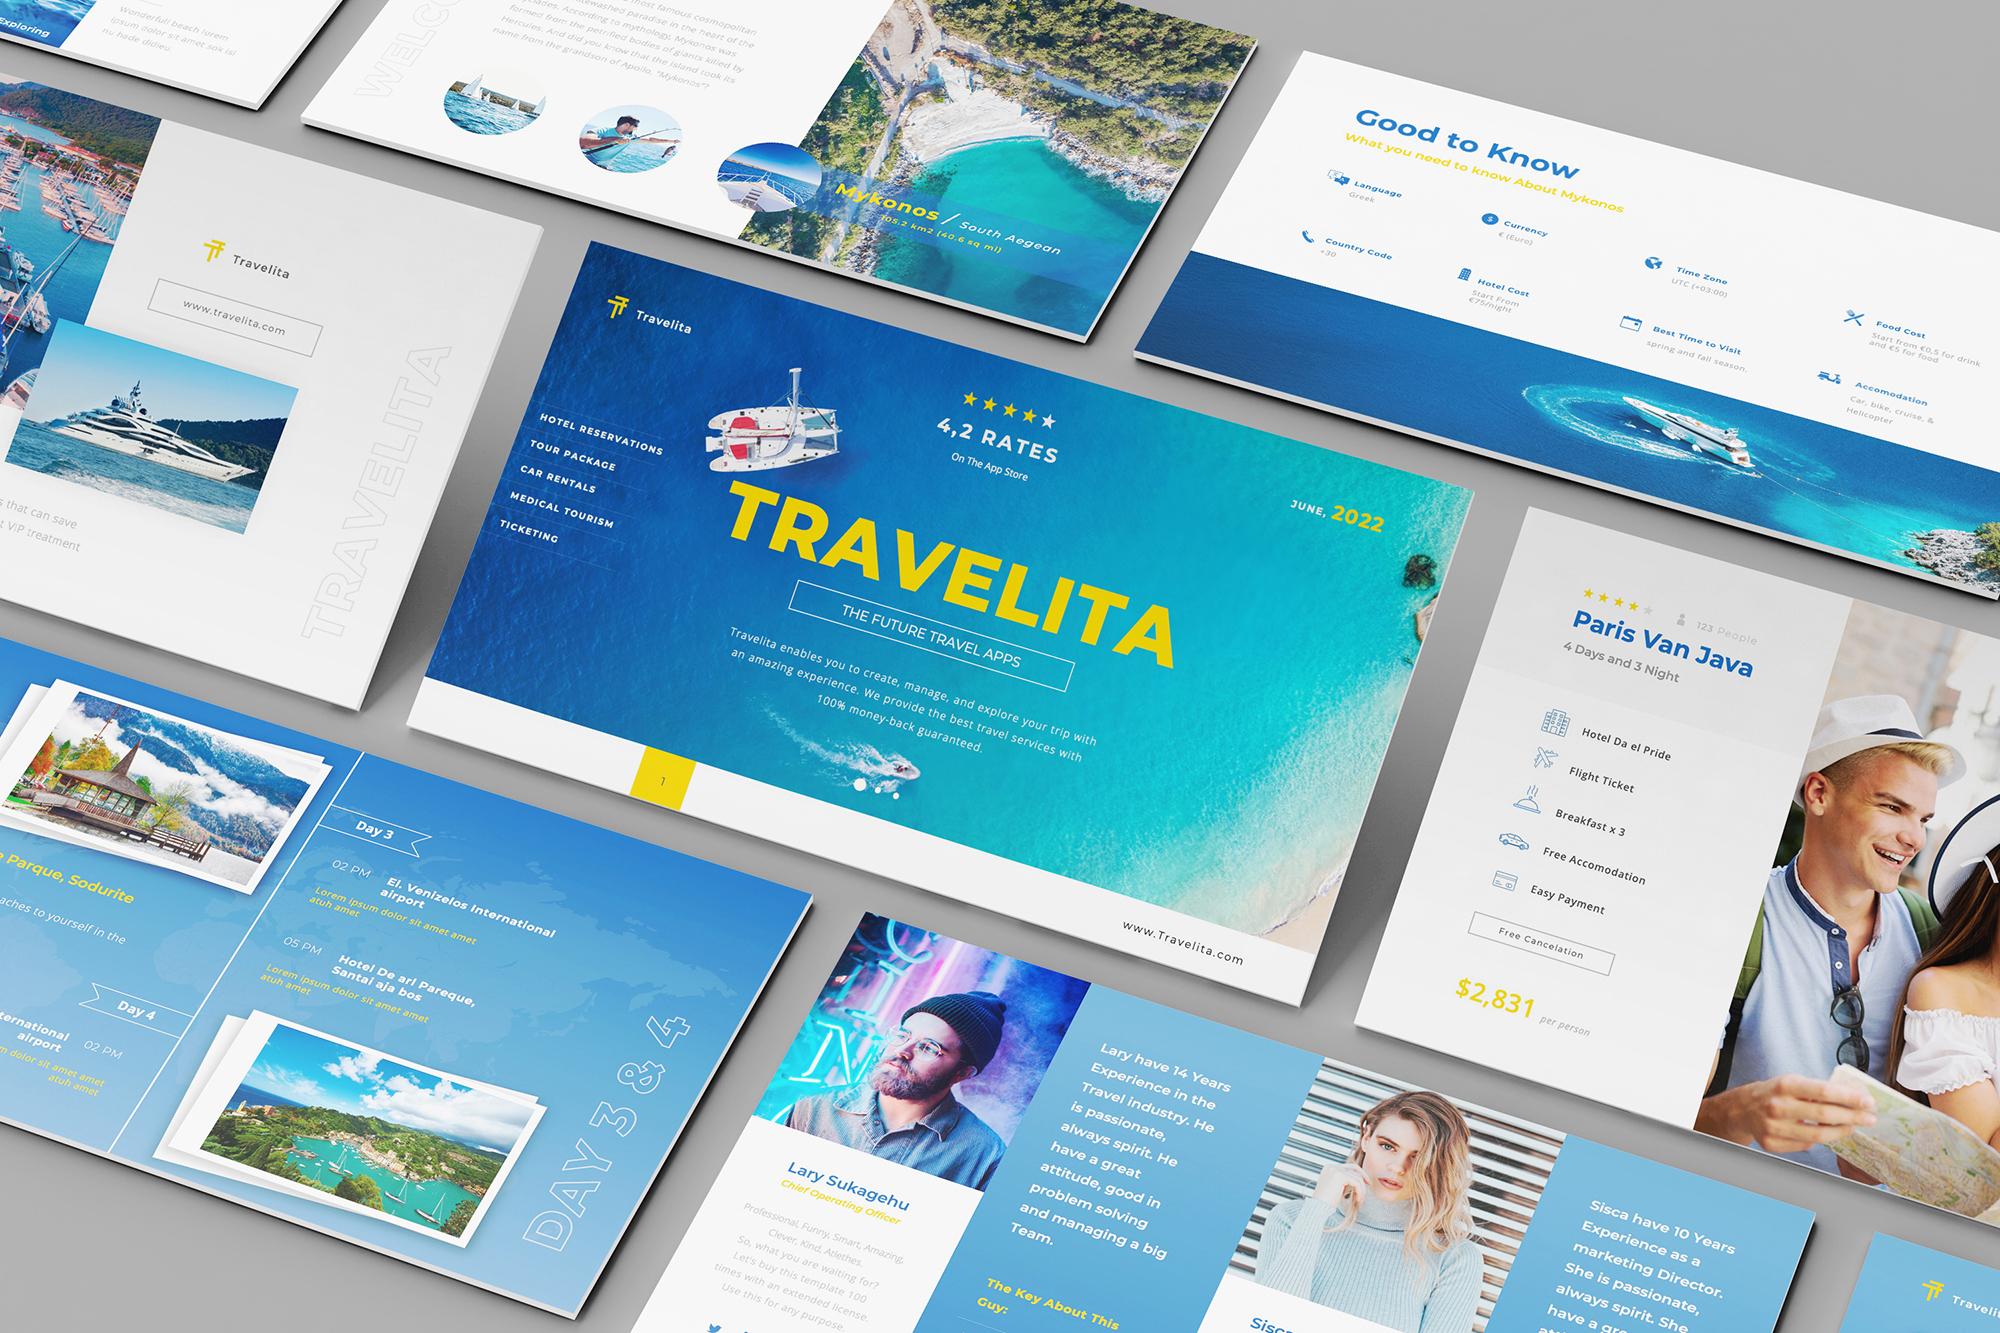 12 Best Travel Google Slides Templates and Themes for Agencies, Tour